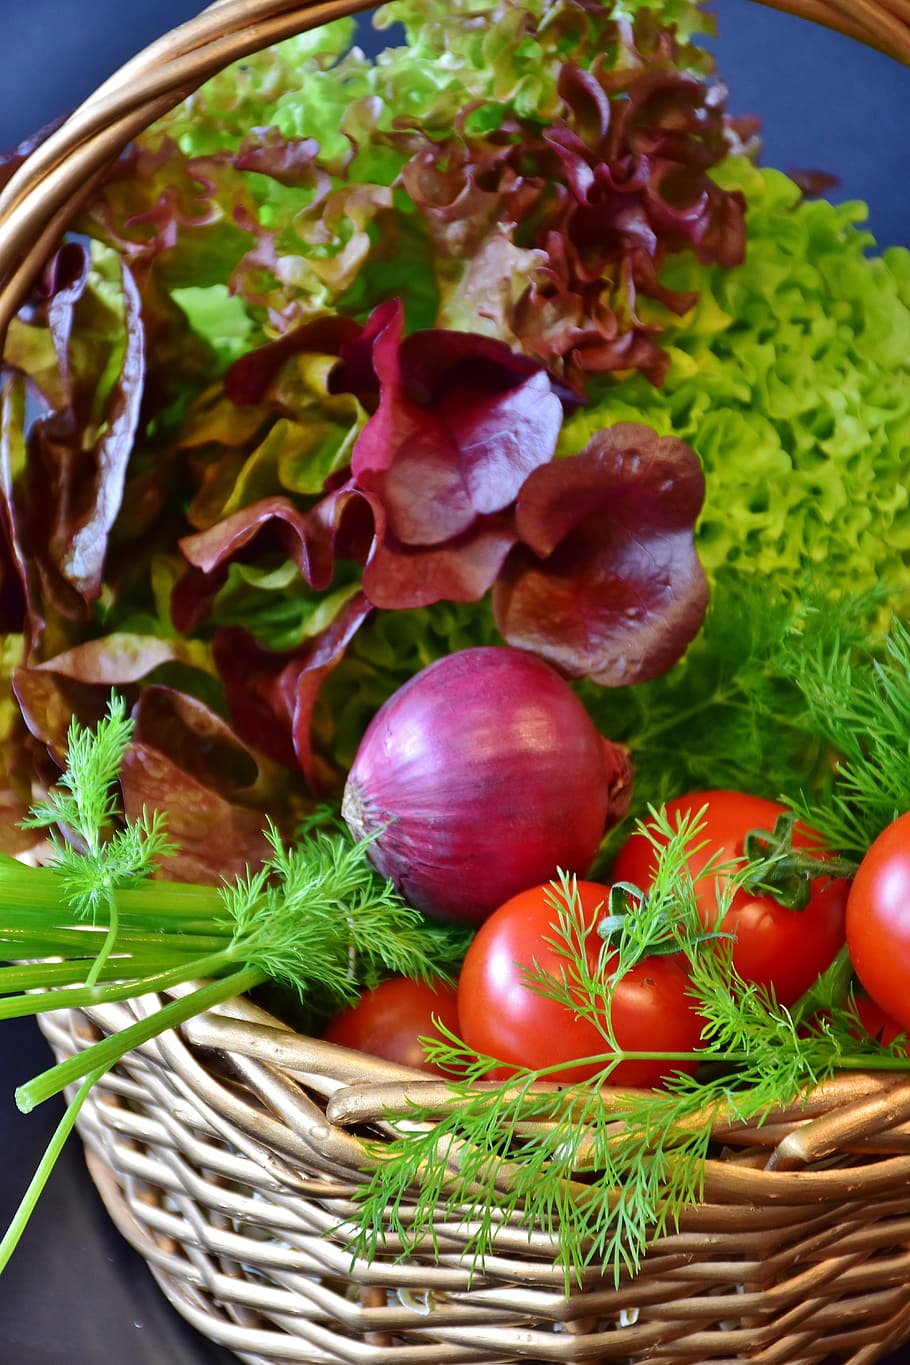 tomato fruits, onion bulb, basket, salad, tomatoes, mixed salad, onion, dill, red onion, lollo rosso